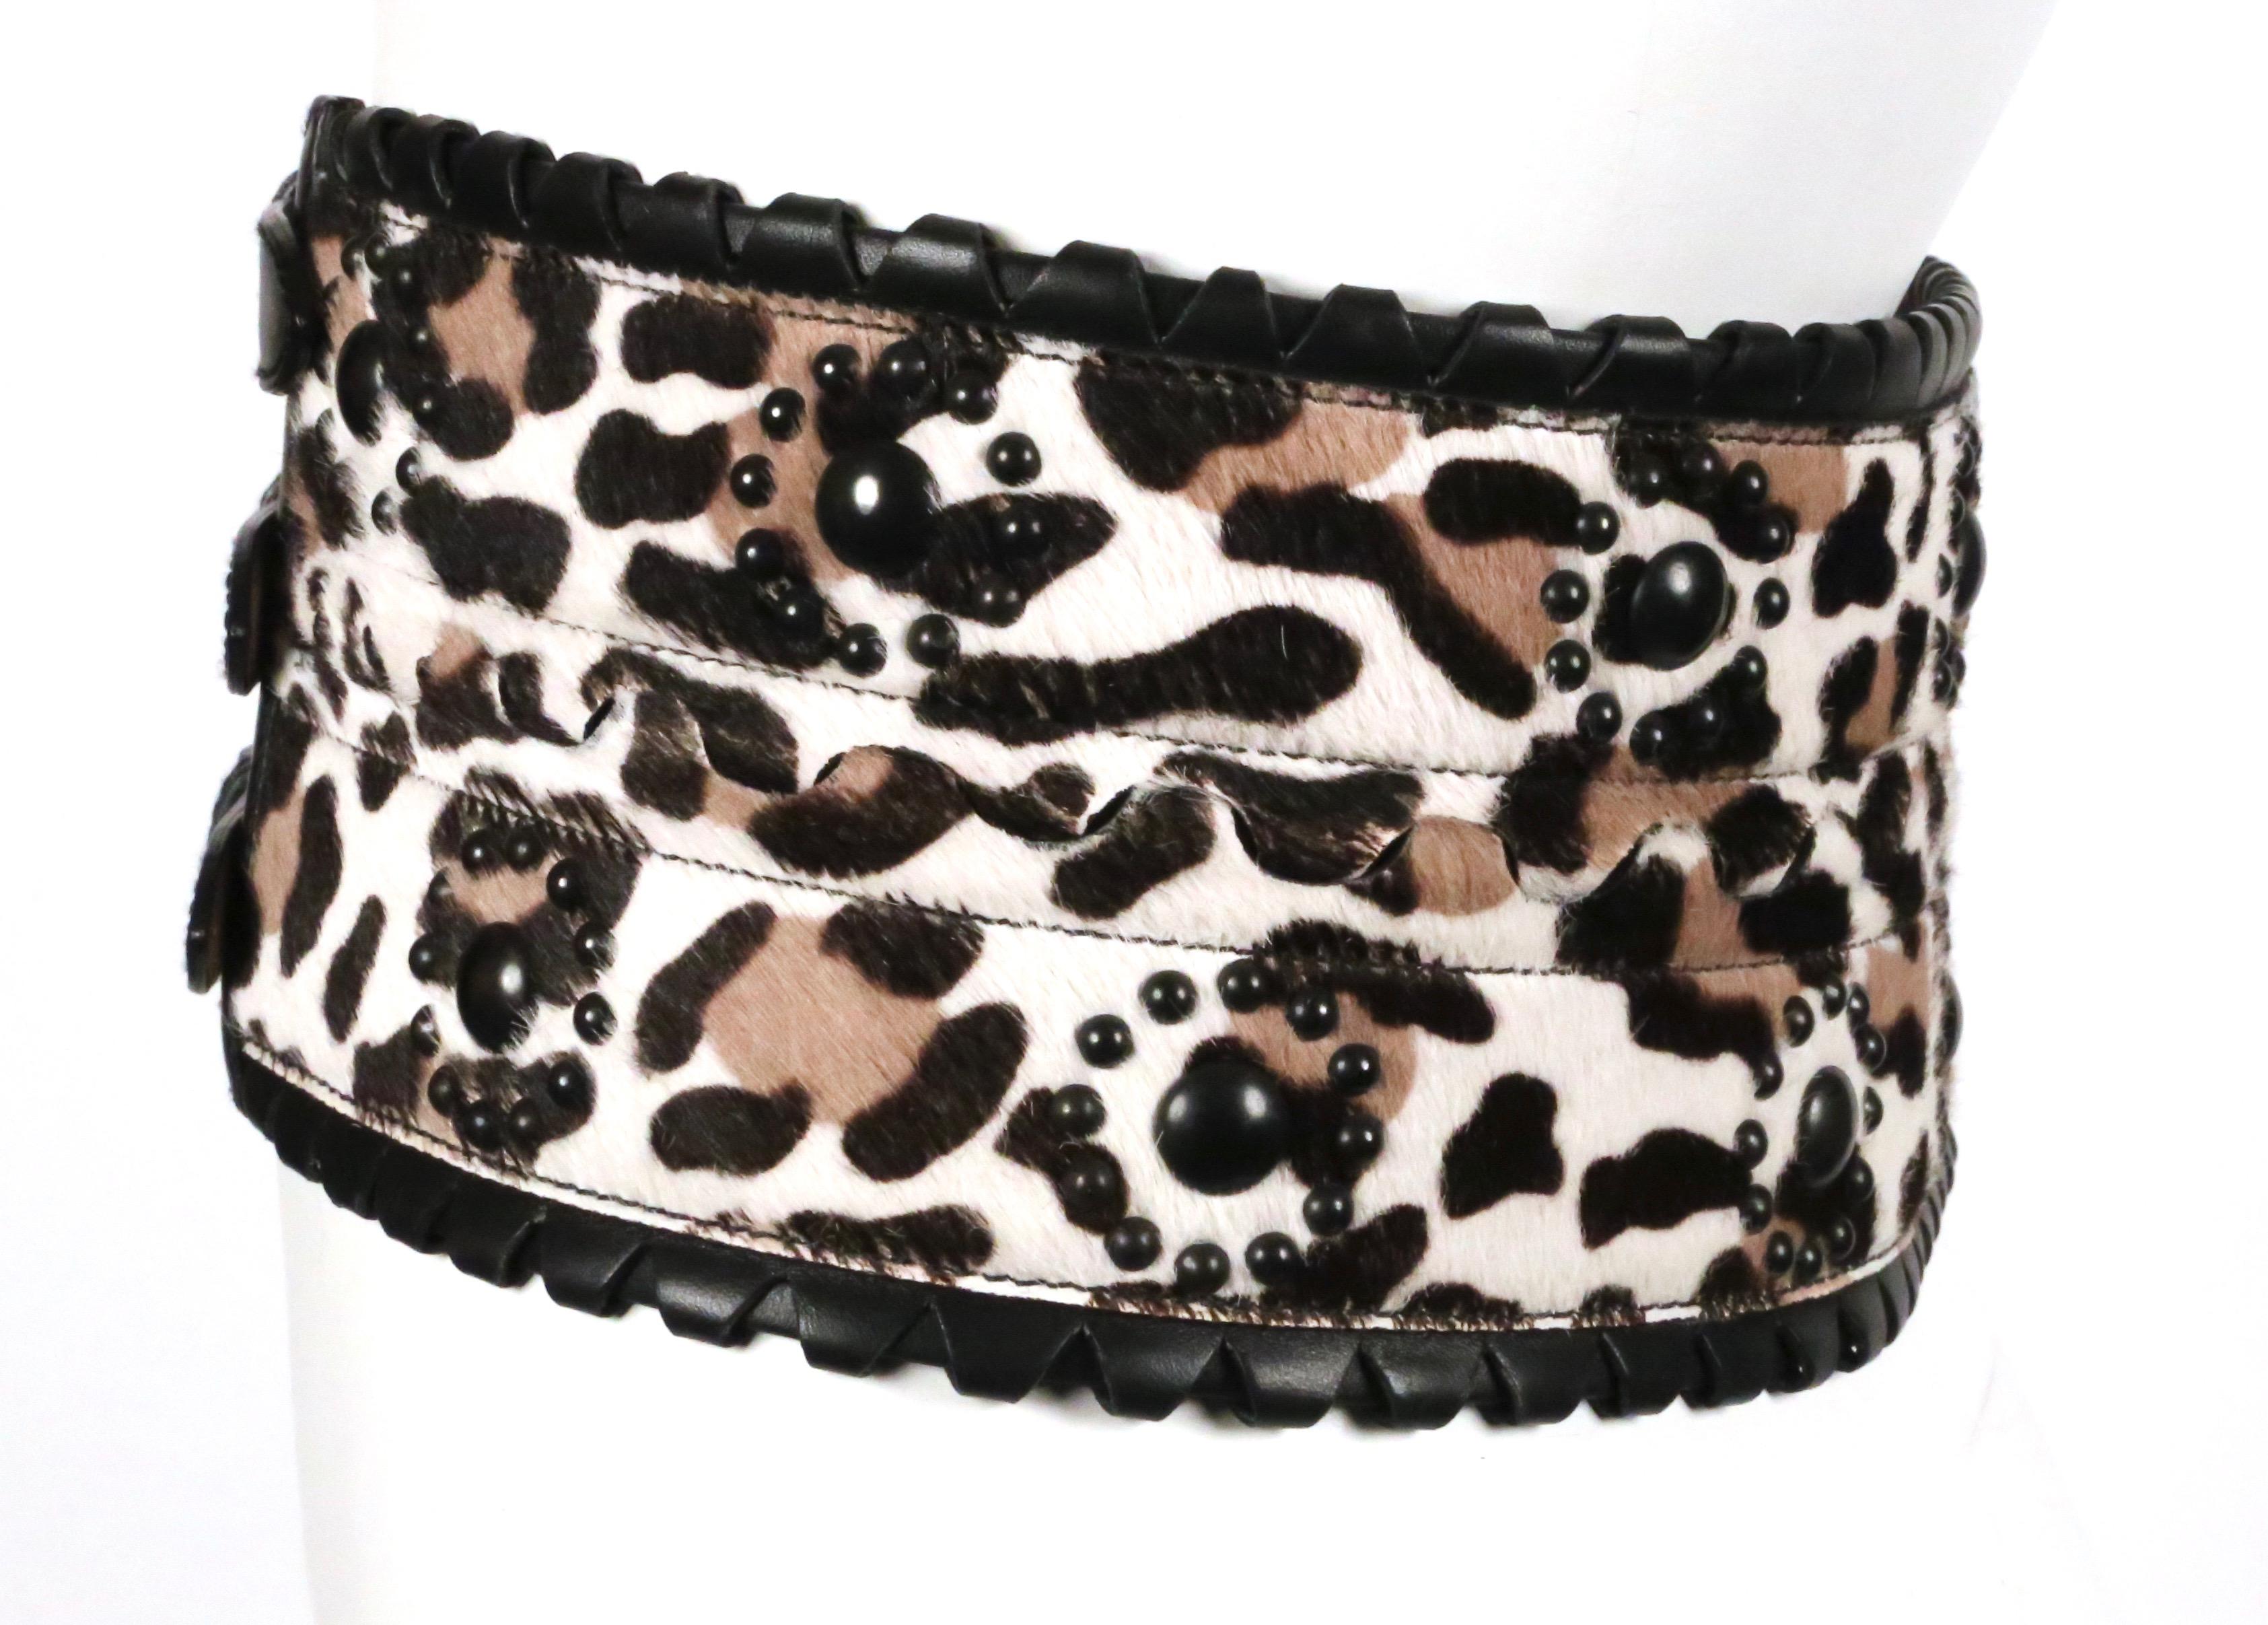 Extra-wide, leopard-printed, calf hair belt with studded detail, triple buckle closure and black leather trim from Azzedine Alaia. French size 80. Belt measures just under 4.75